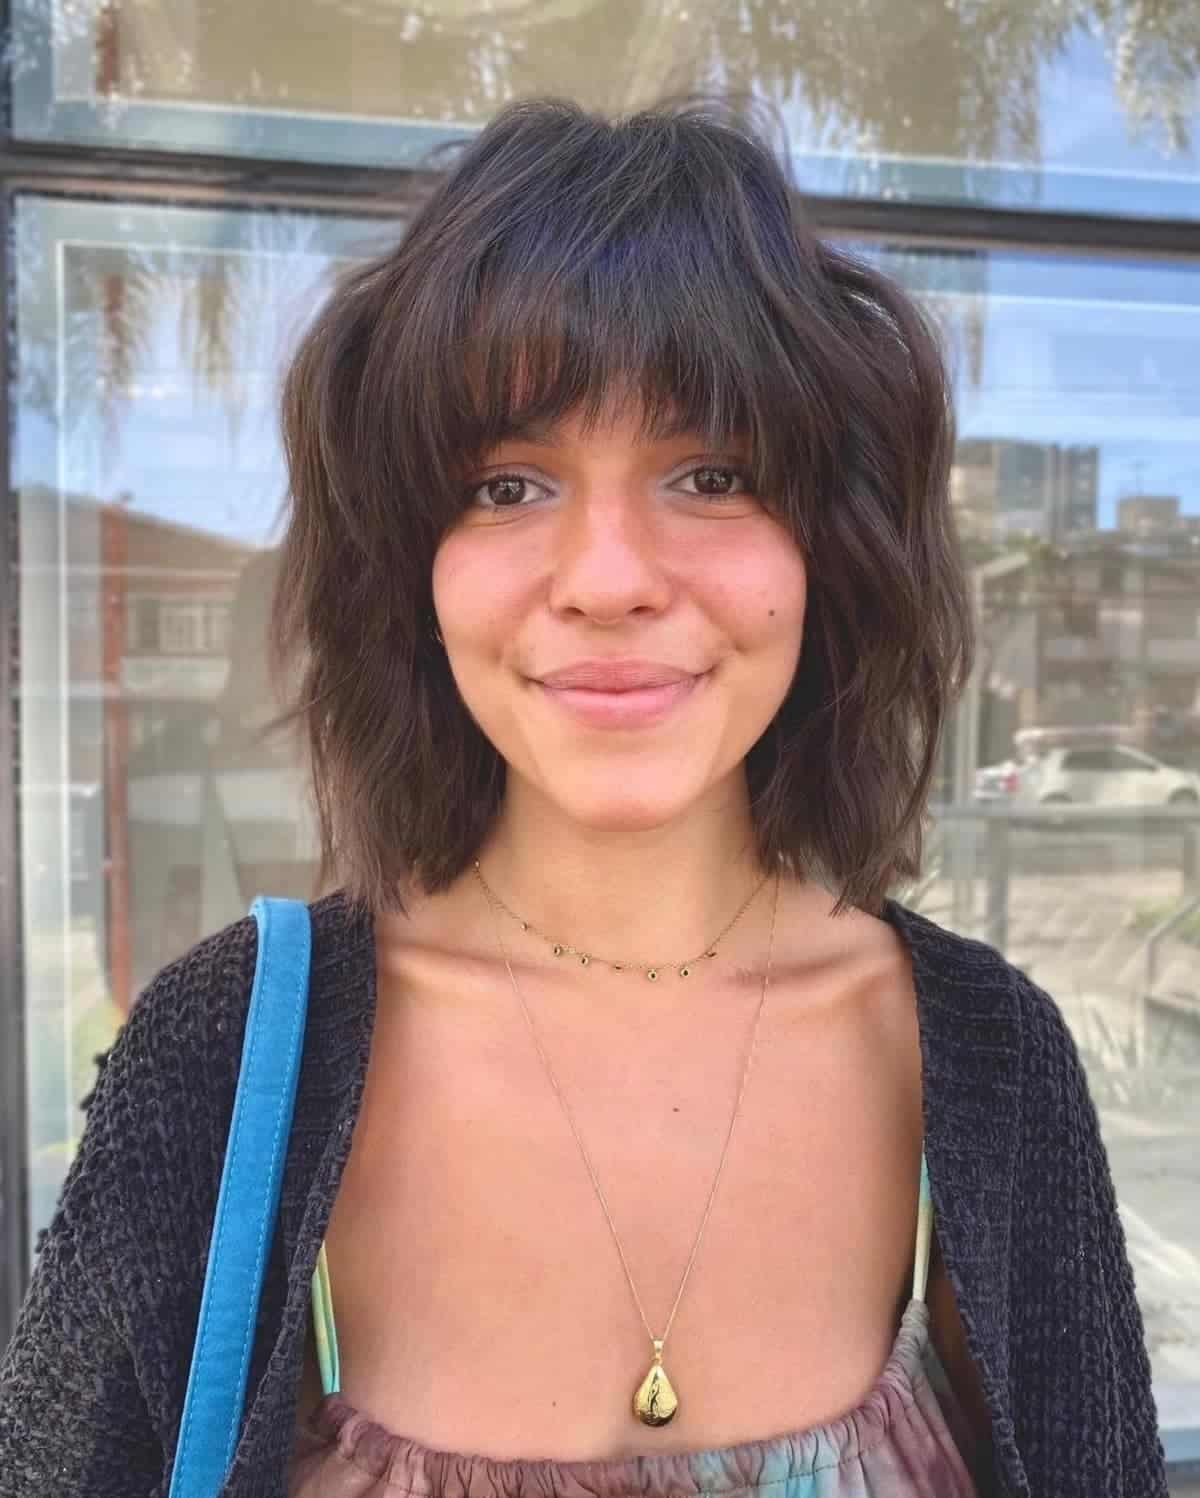 These 23 Short Shaggy Bob Haircuts Are The On-Trend Look Right Now